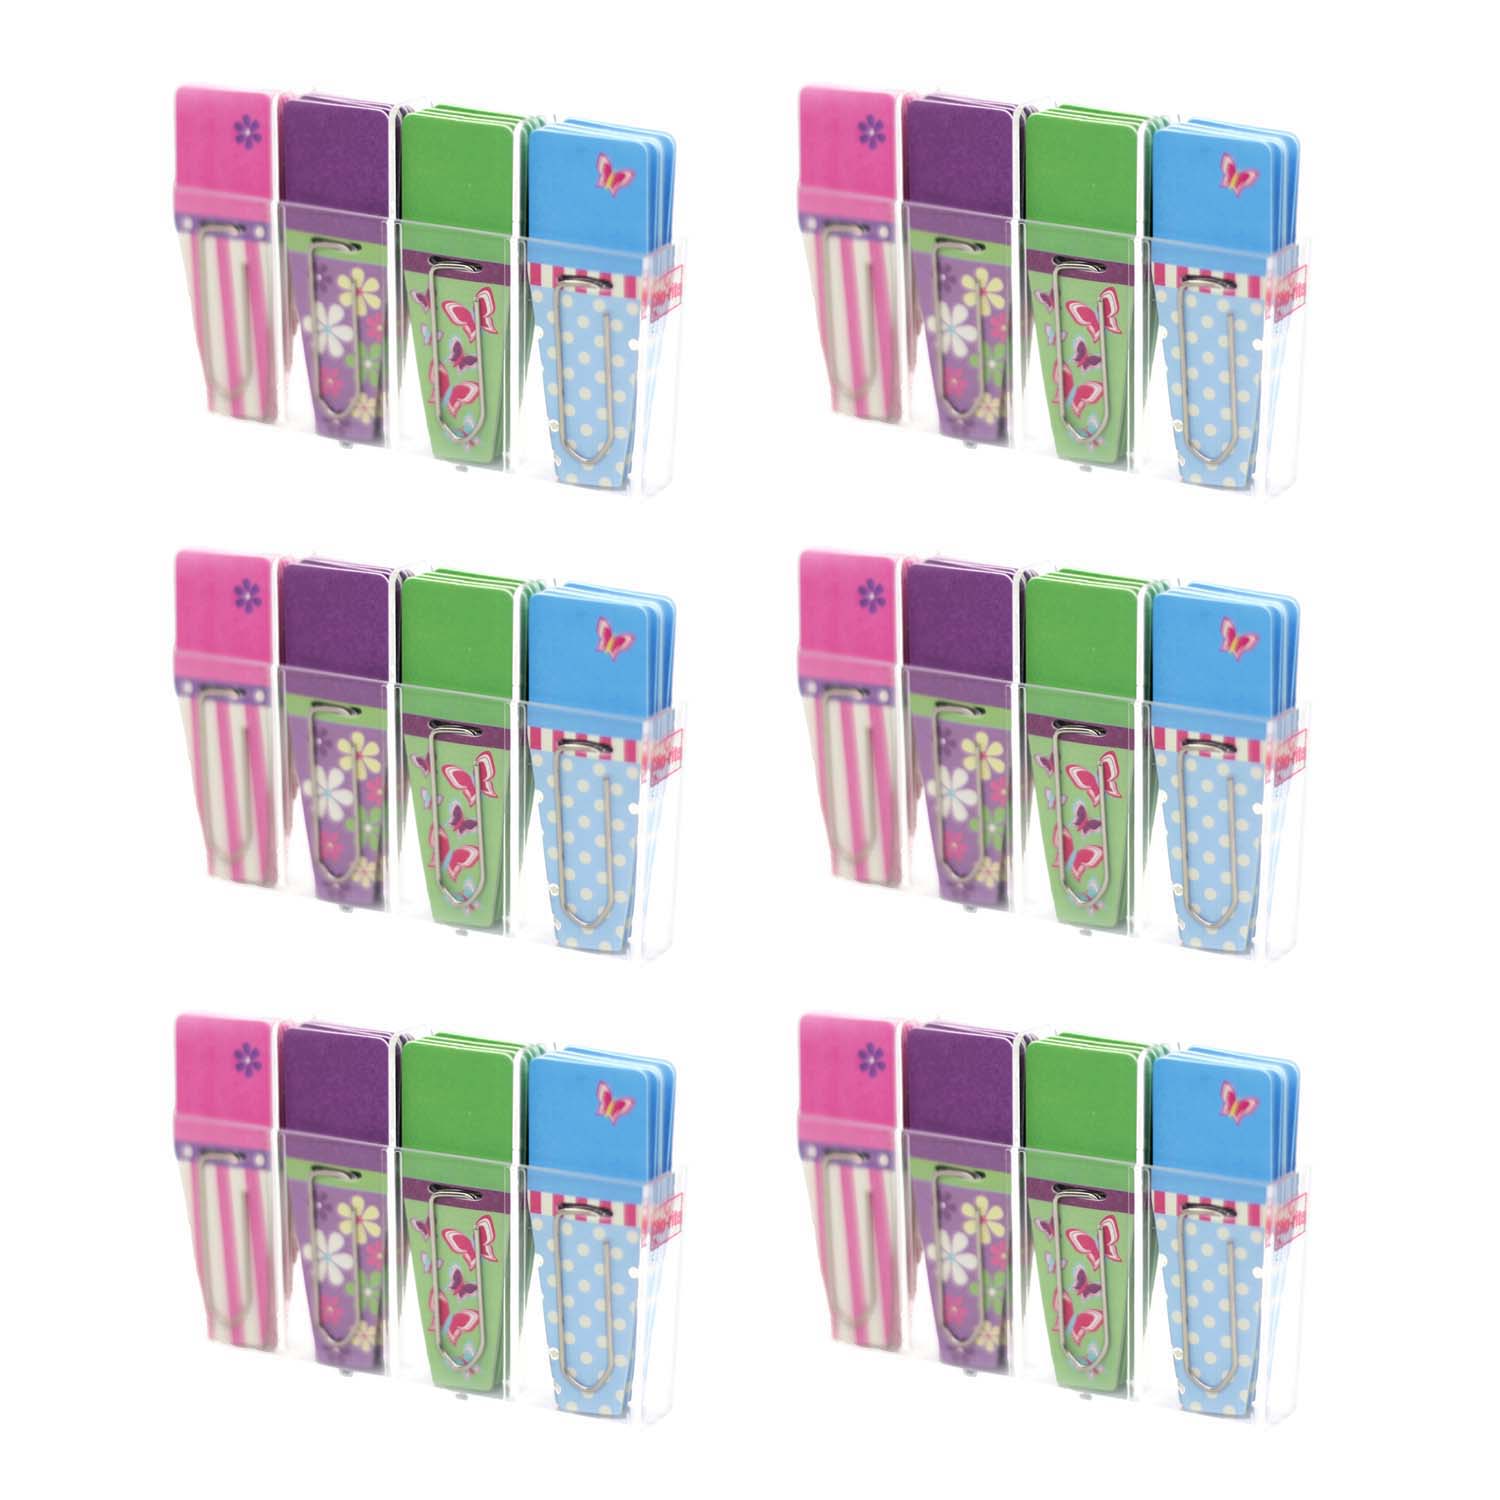 Clip-Flags, Spring, Pink/Purple/Green/Blue, 24 Per Pack, 6 Packs